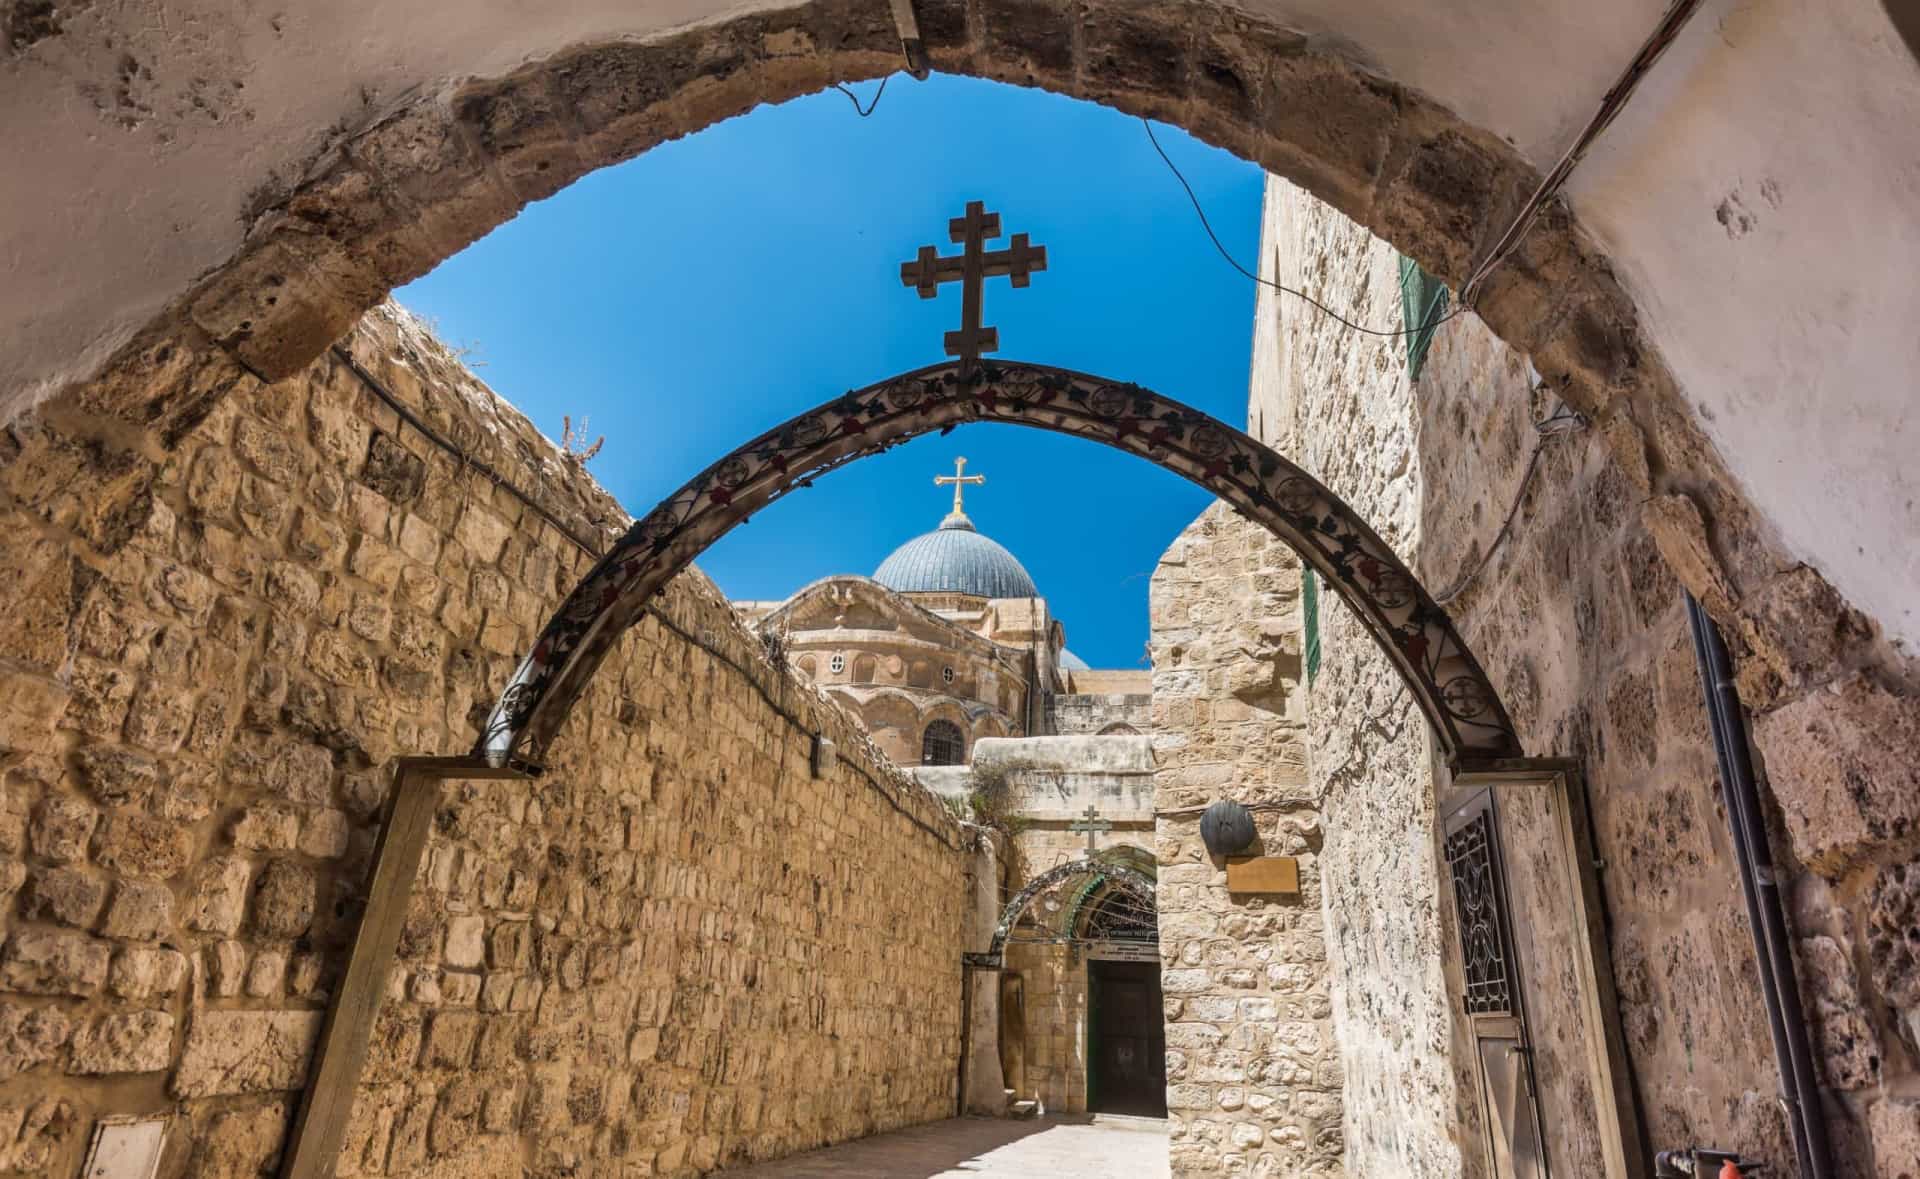 <p>The Via Dolorosa, which in Latin means the "Sorrowful Way," is a processional route in Old Jerusalem that represents the path Jesus would have taken under escort by Roman soldiers on the way to his crucifixion. The byway is marked by nine Stations of the Cross.</p>